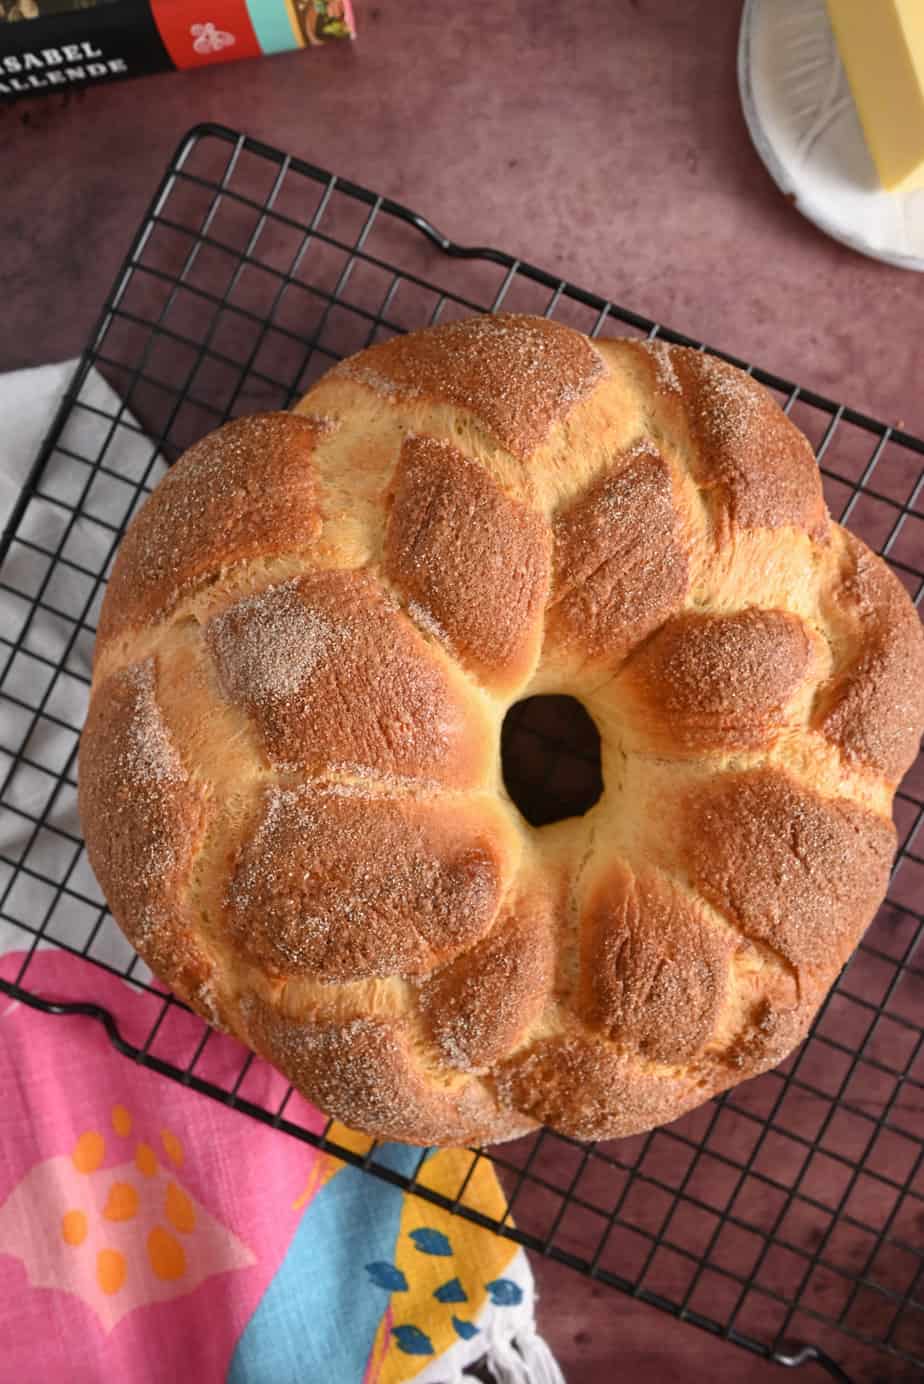 Baked loaf of pan de muerto cooling on a wire rack.